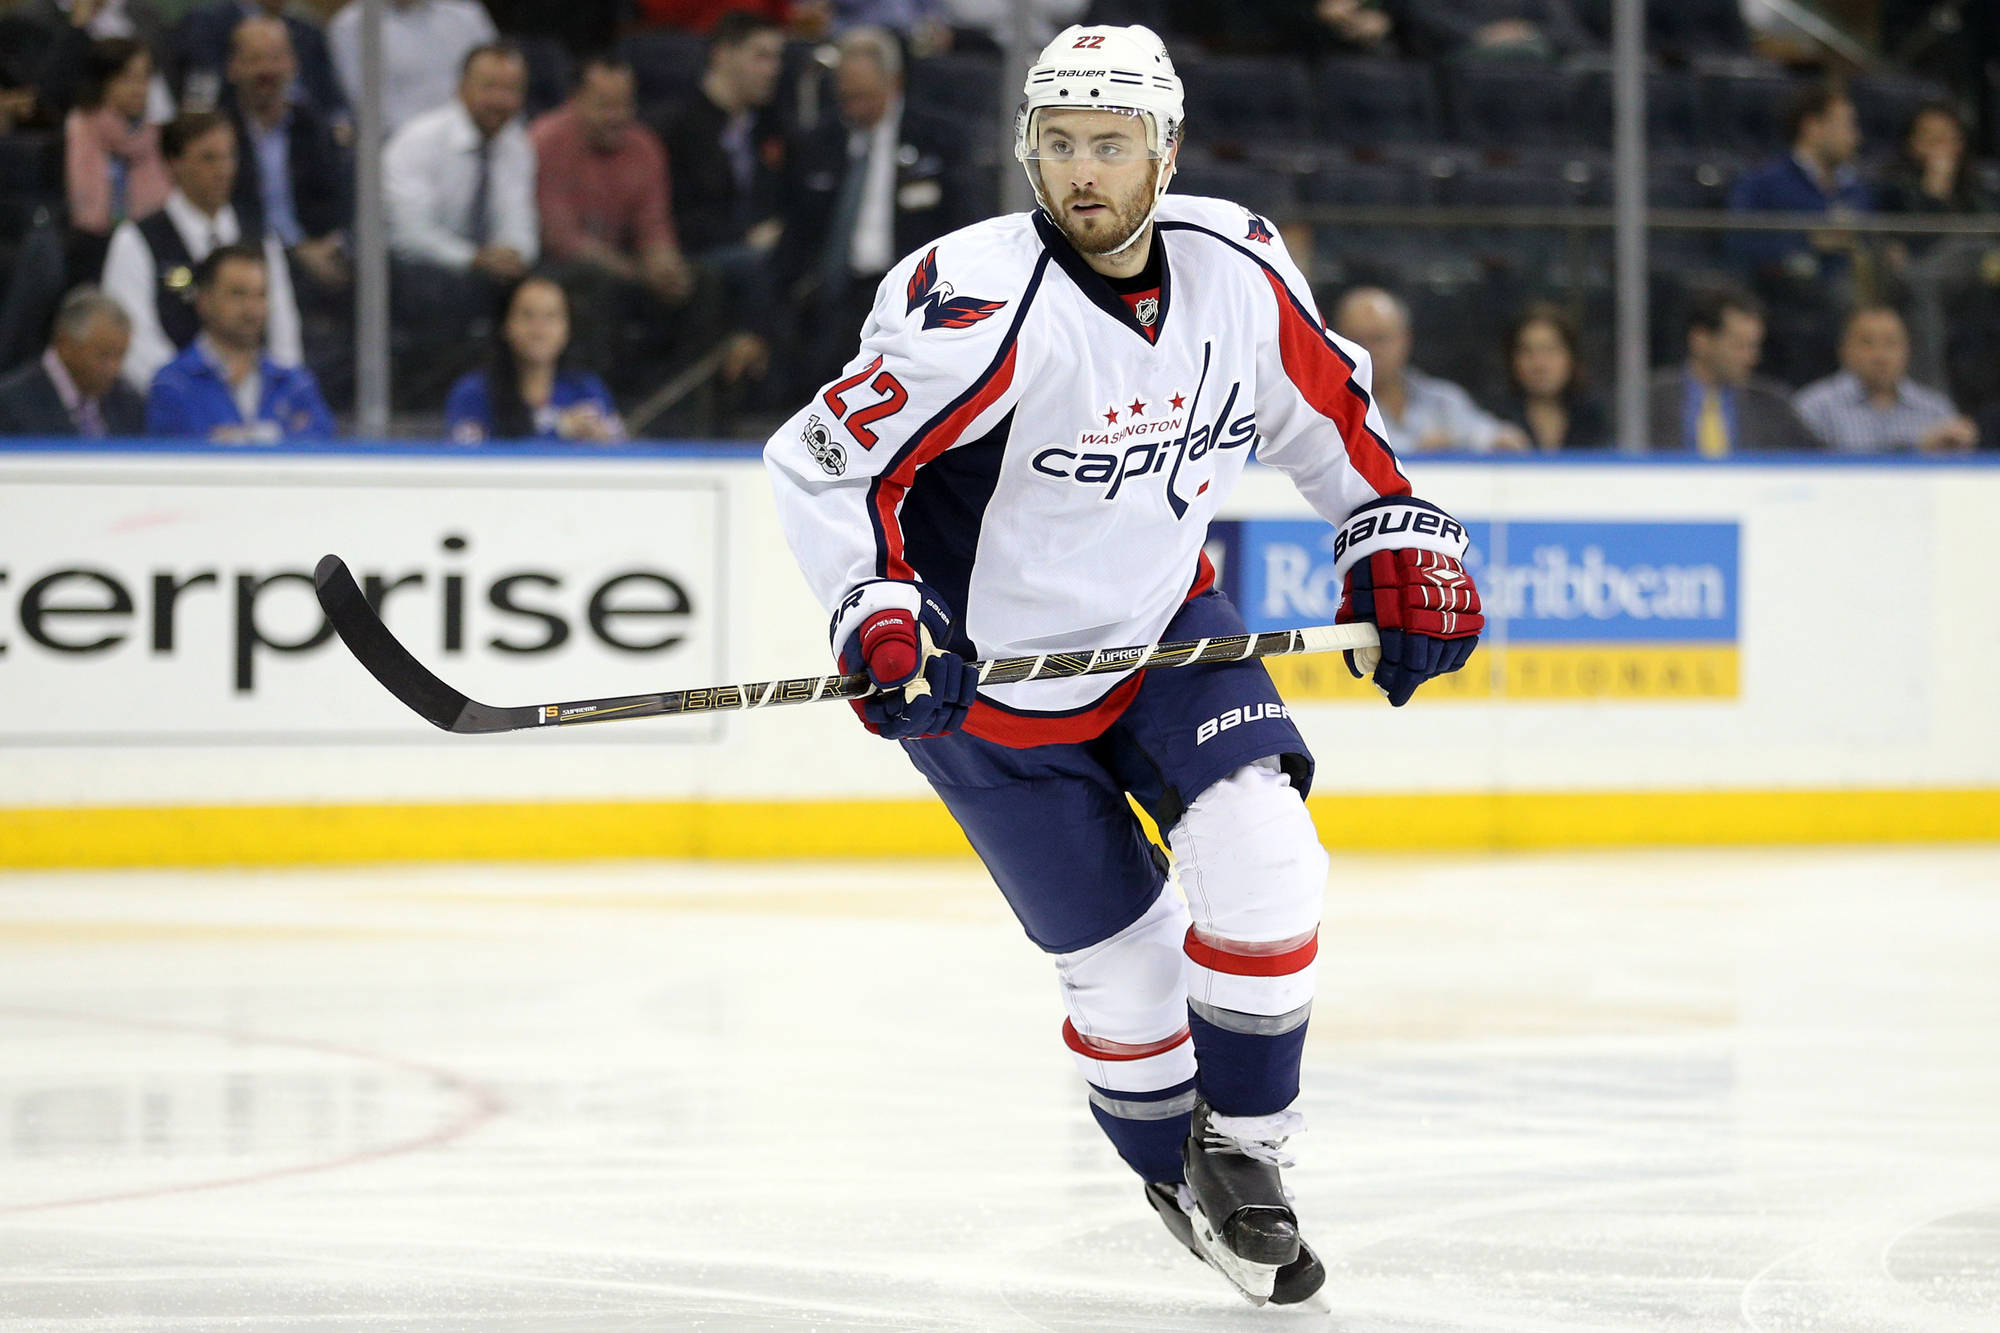 Capitals primed for Cup run after Shattenkirk trade